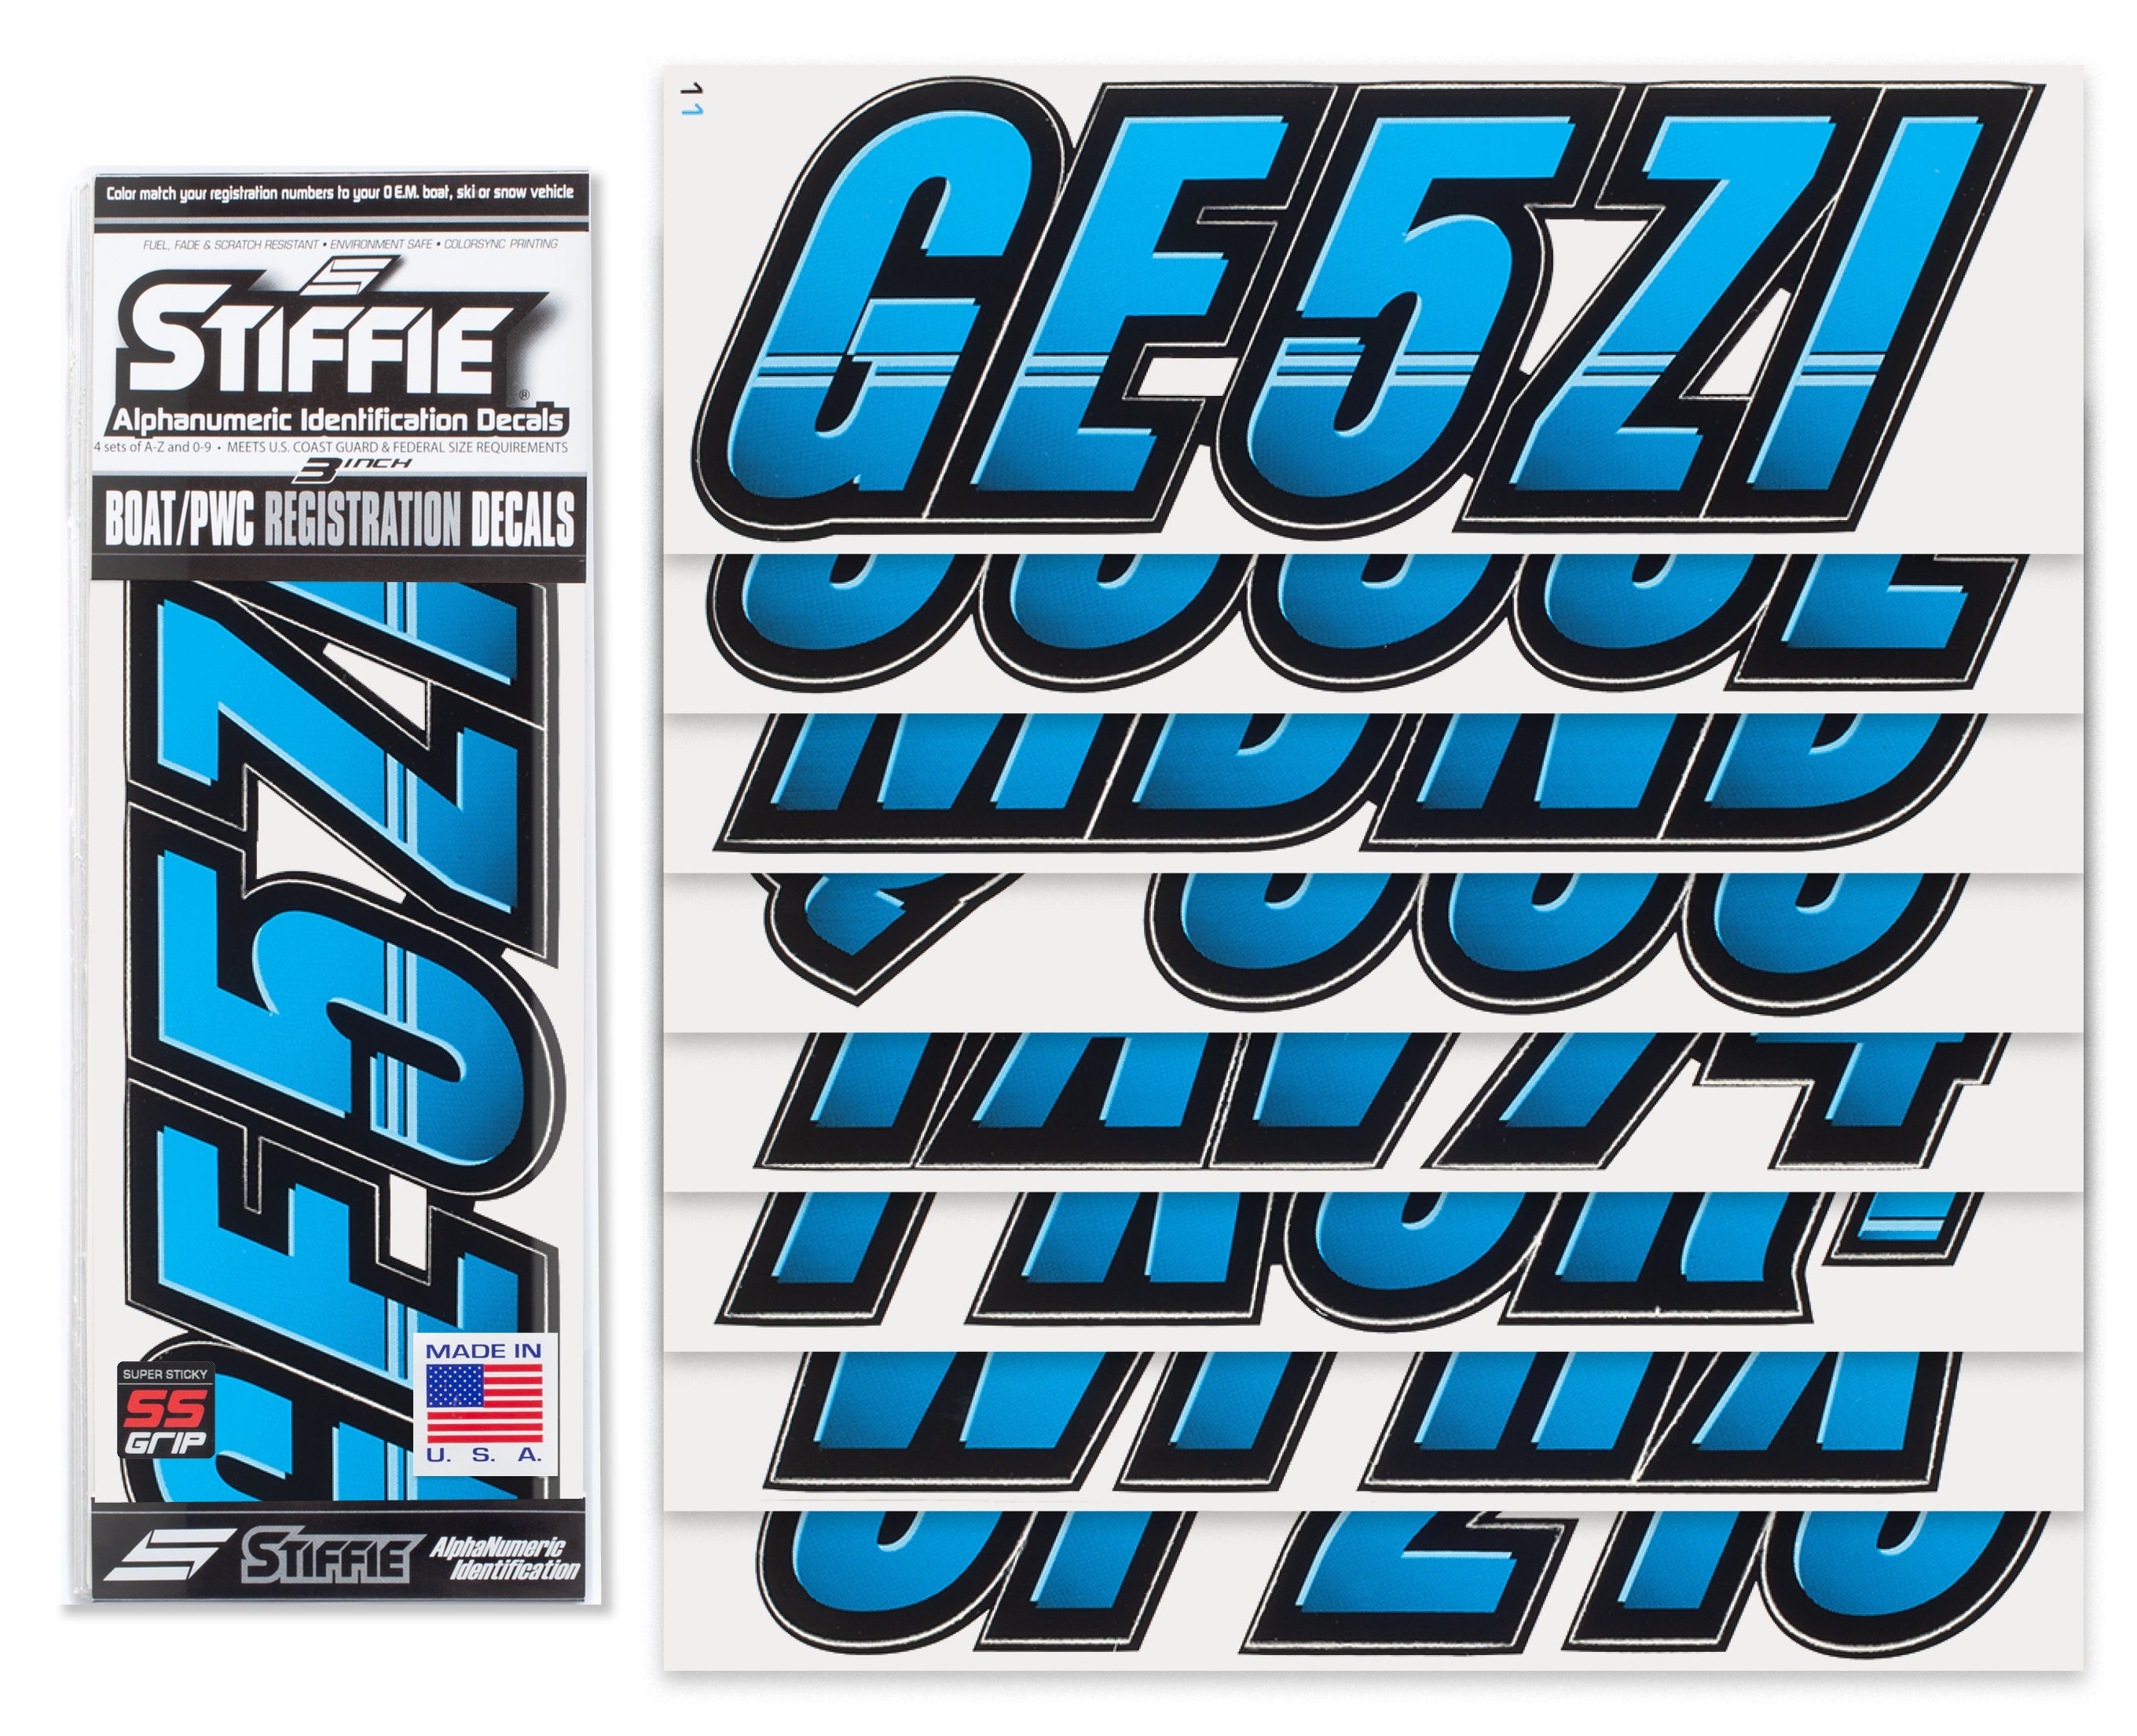 Stiffie Techtron Blueberry Blue/Black Super Sticky 3" Alpha Numeric Registration Identification Numbers Stickers Decals for Sea-Doo Spark, Inflatable Boats, Ribs, Hypalon/PVC, PWC and Boats